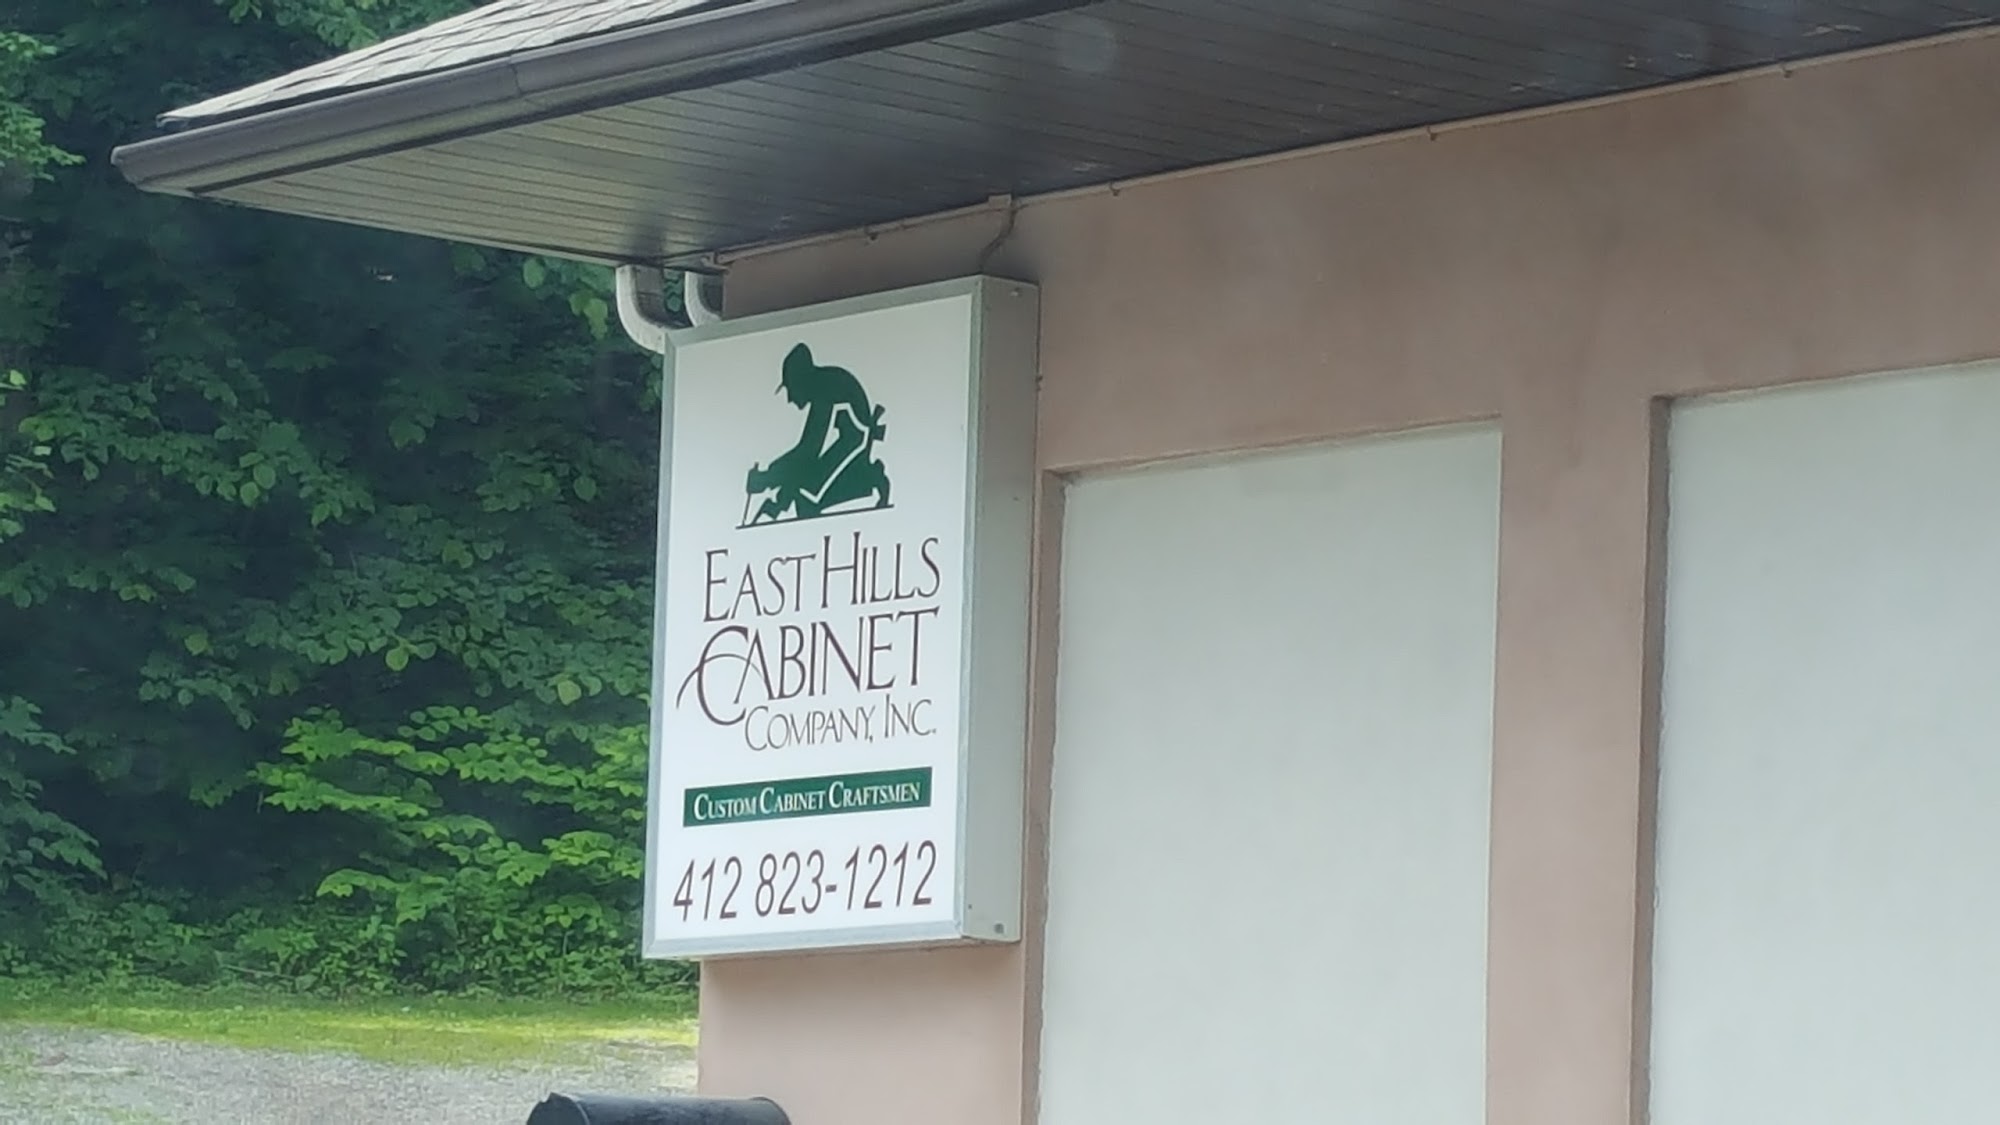 East Hills Cabinet 1575 Ice Plant Hill Rd, North Versailles Pennsylvania 15137